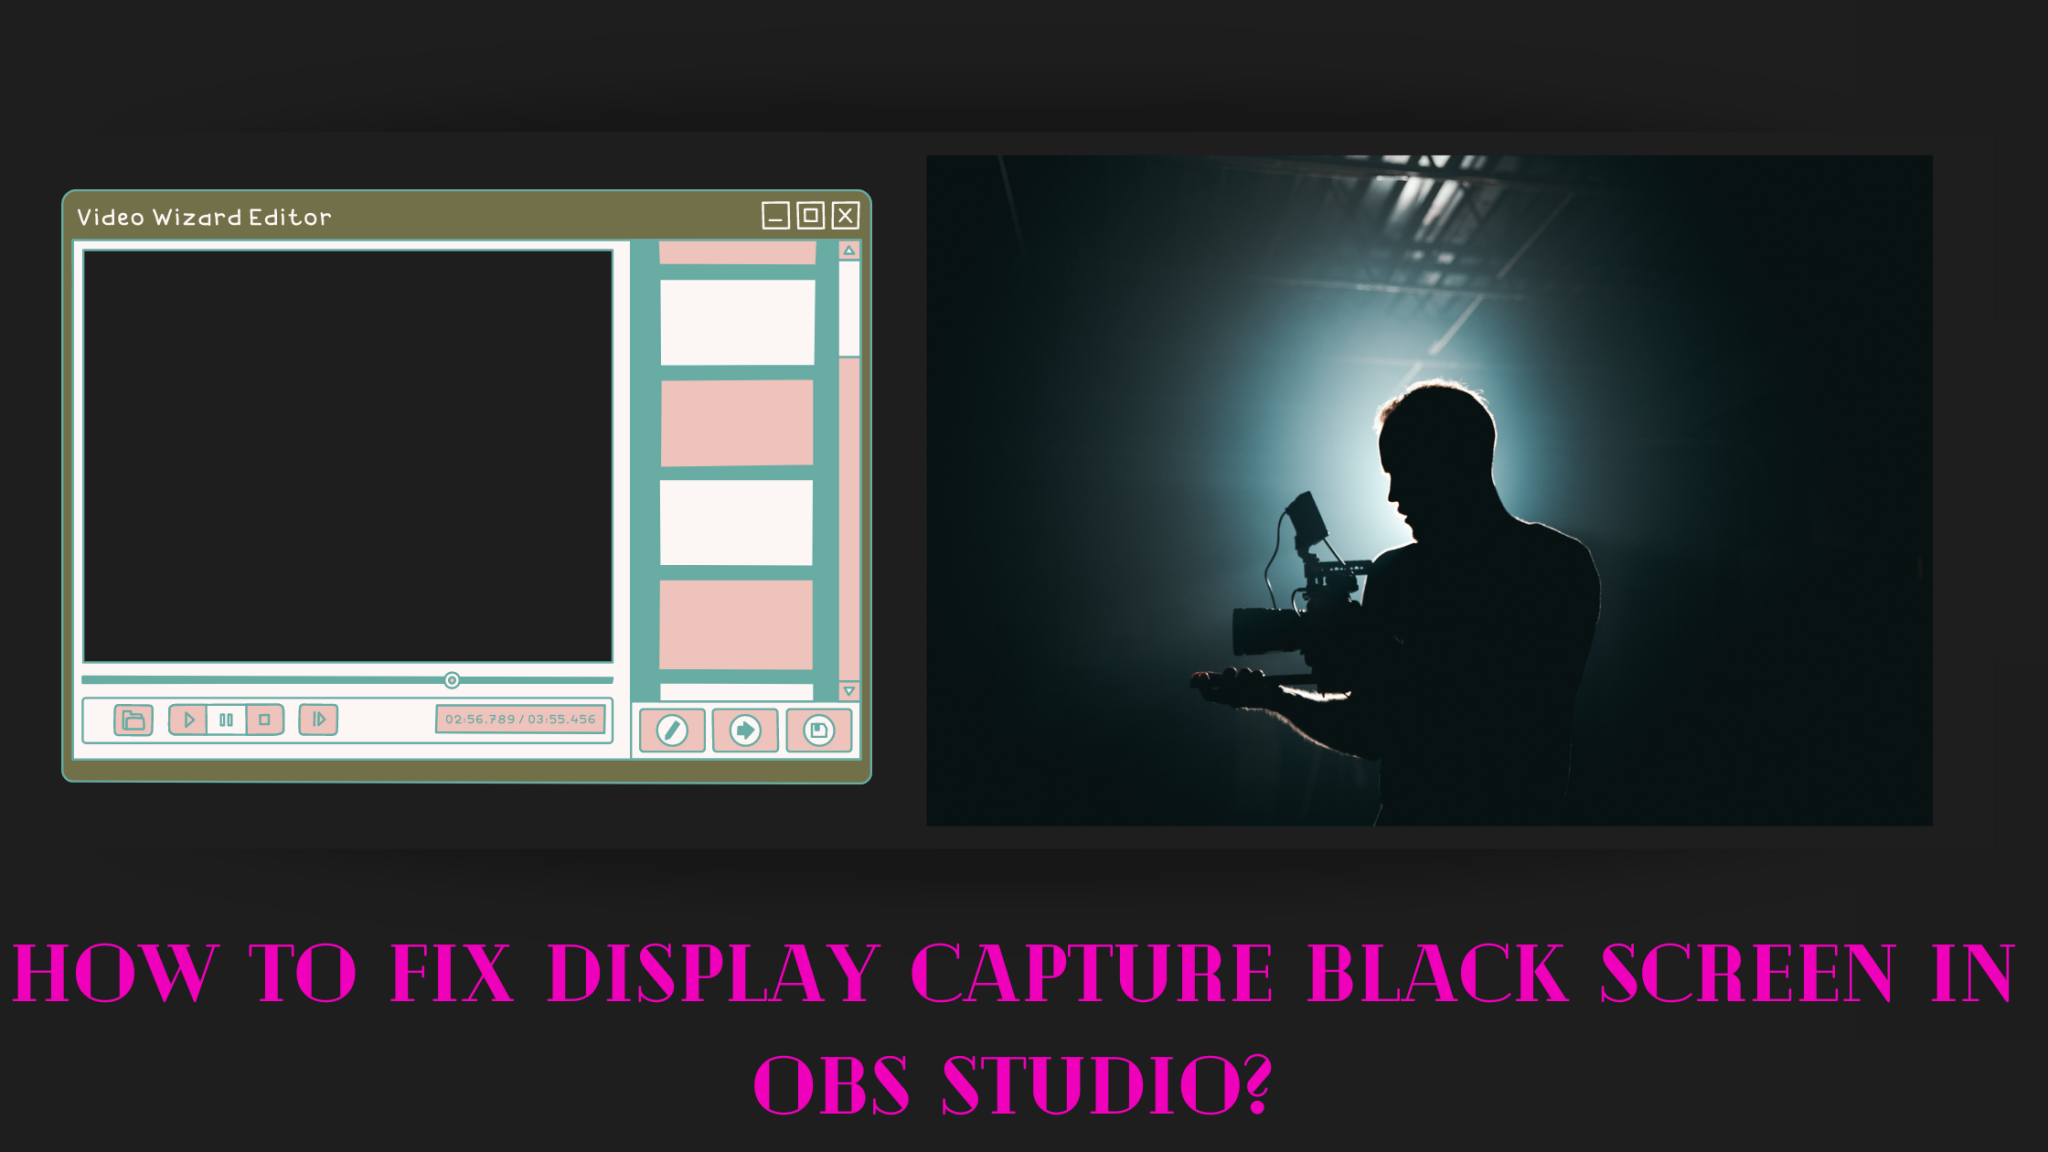 obs studio recording only display